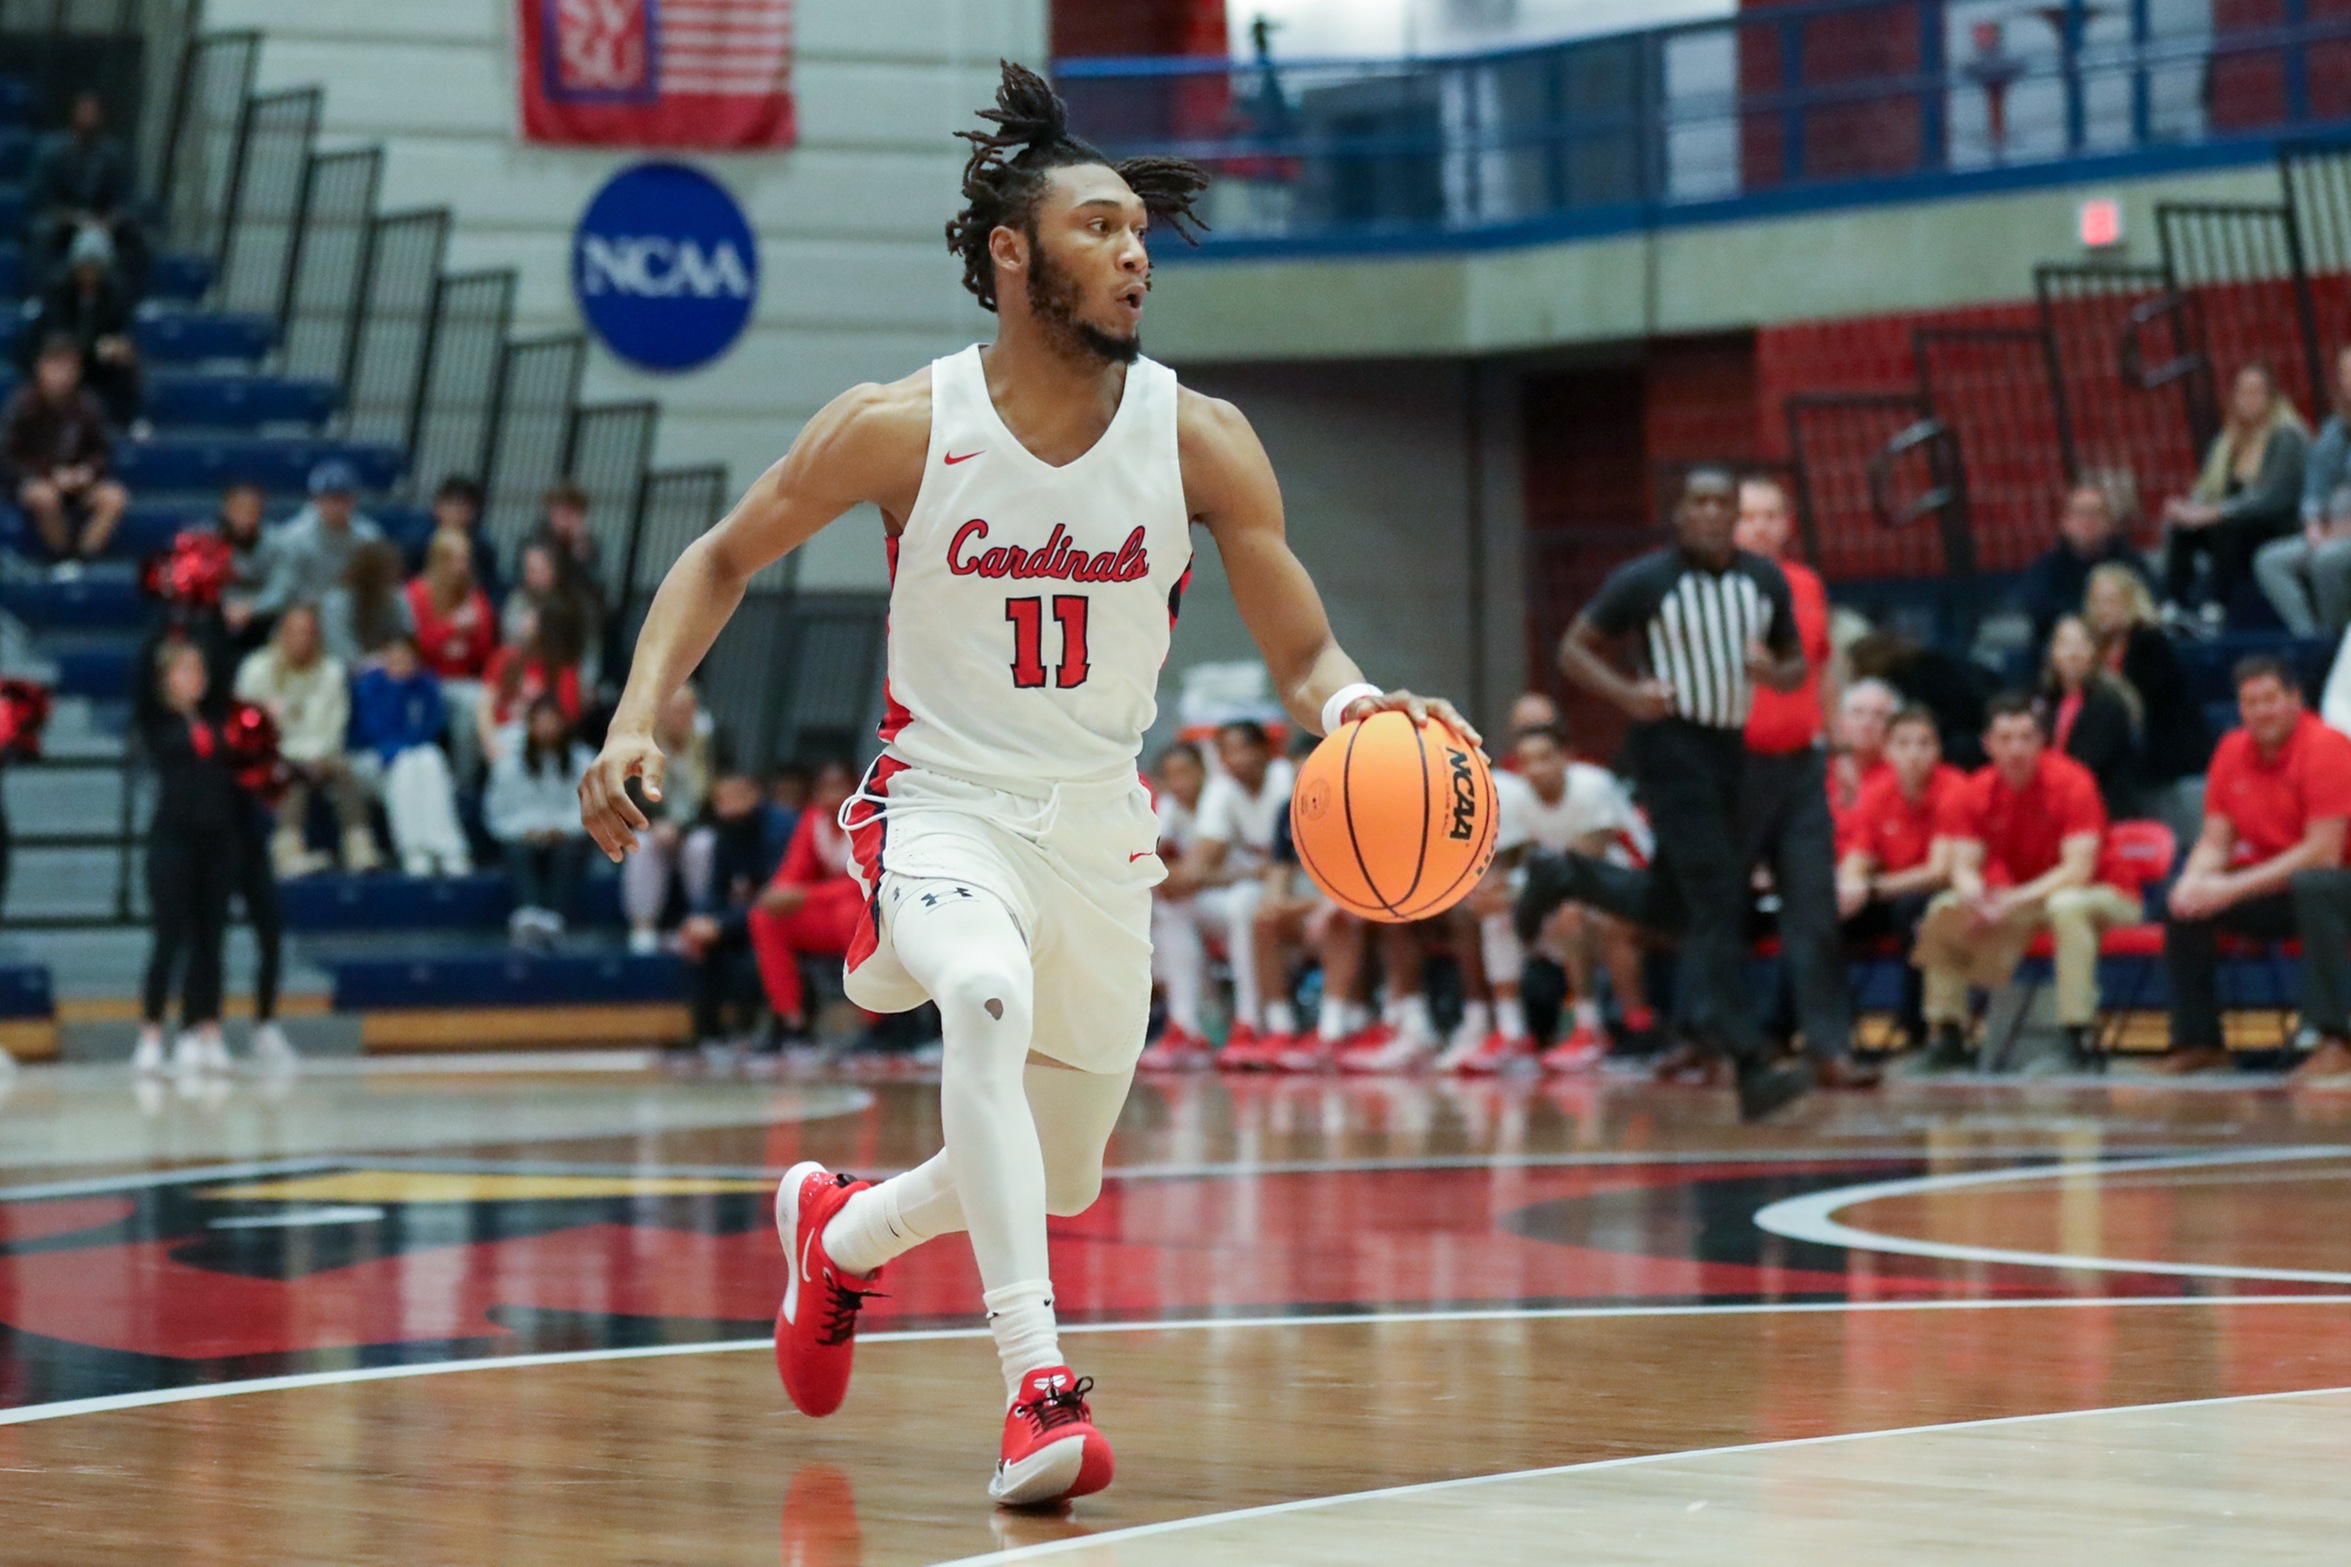 Cardinals Fall in Home Opener against Malone